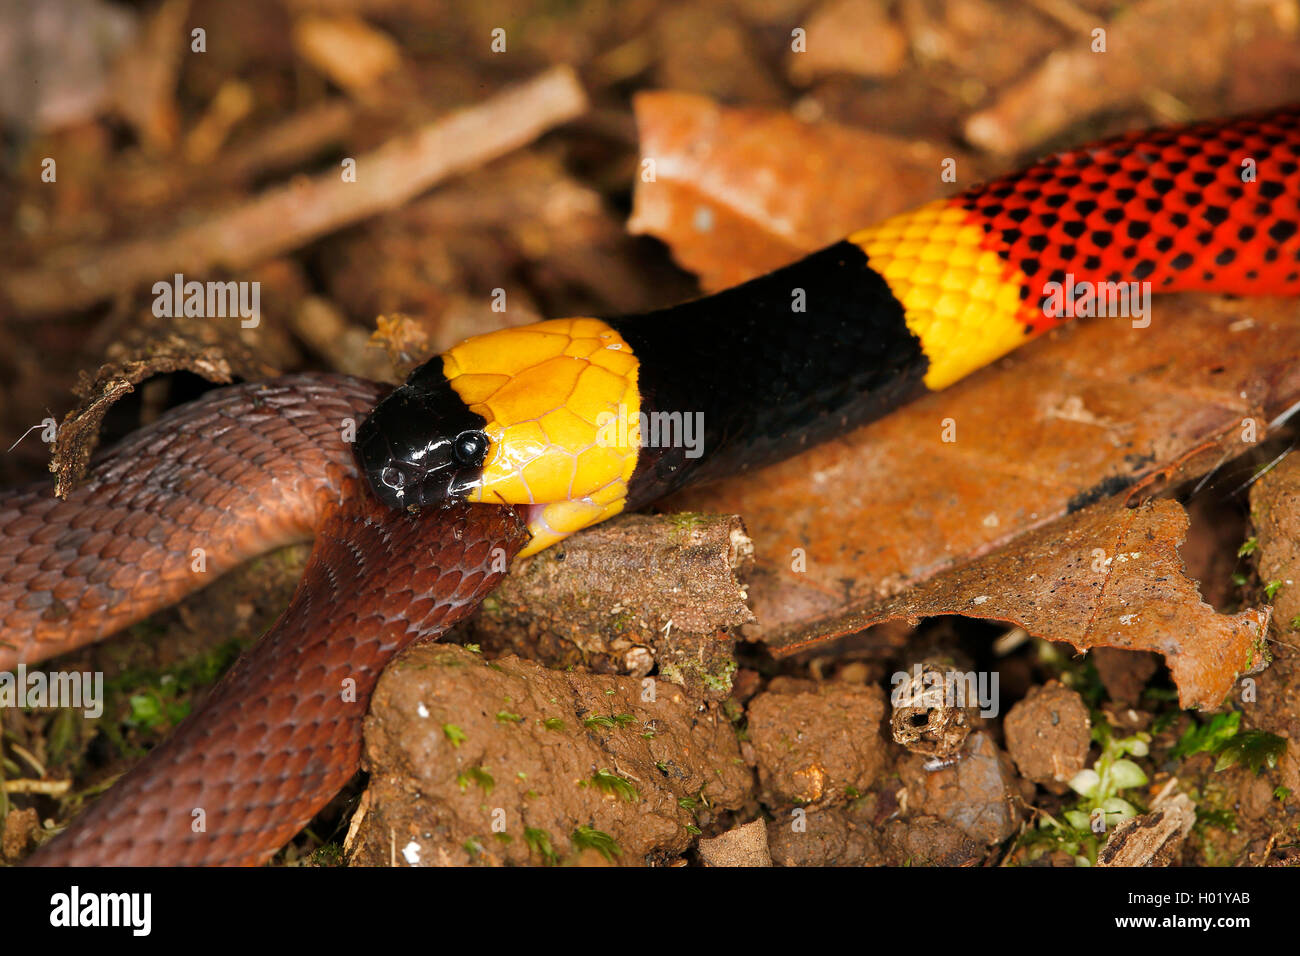 Costa Rican Coral Snake (Micrurus mosquitensis), bites another snake, Costa Rica Stock Photo